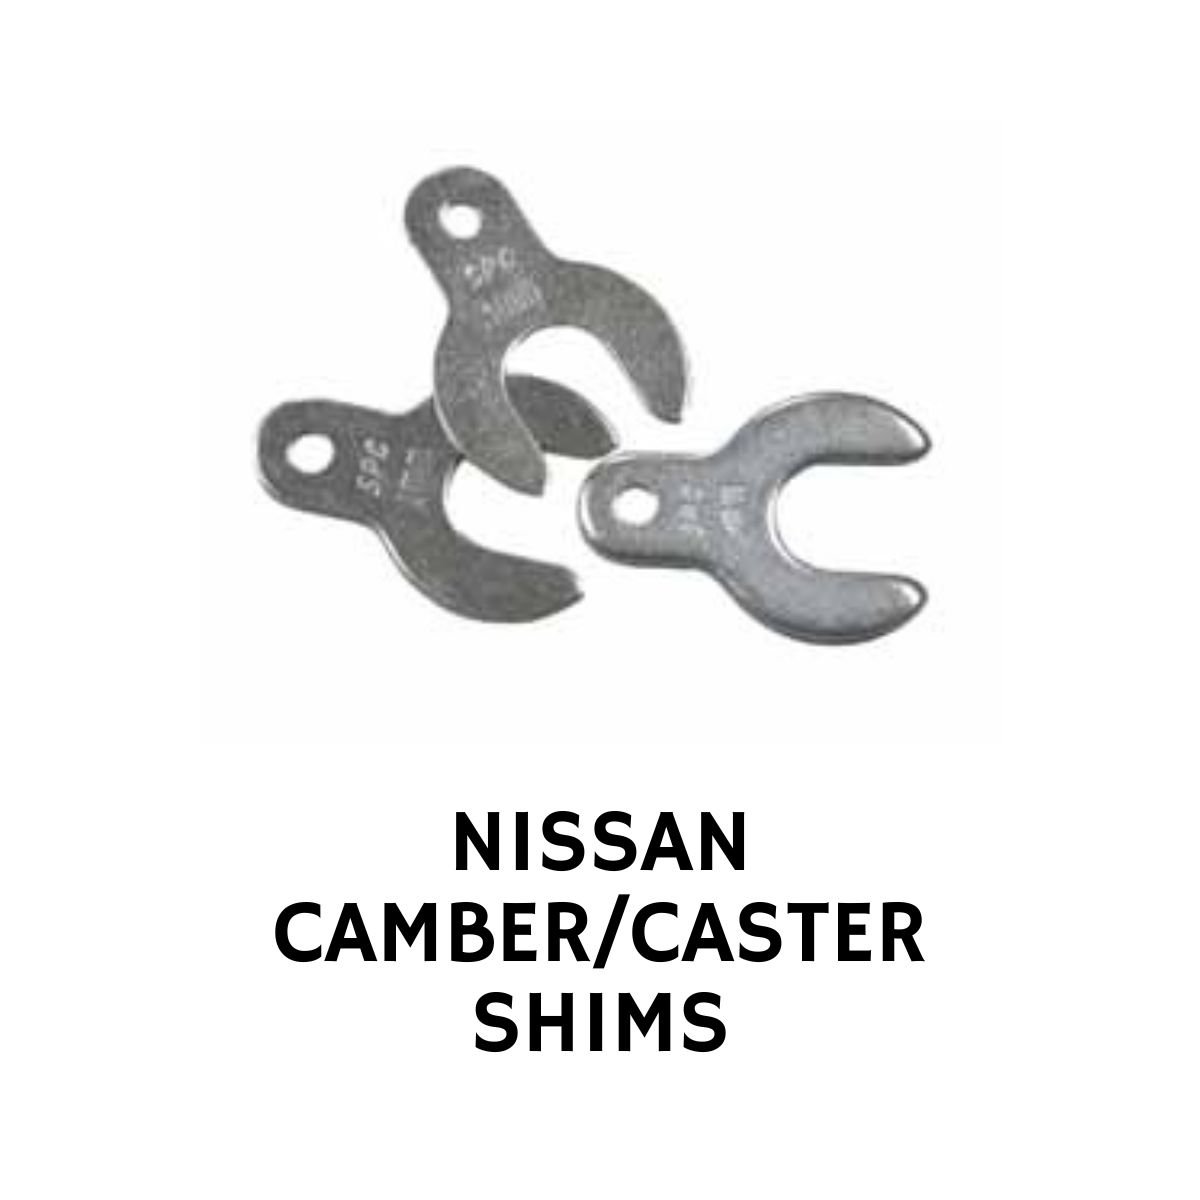 NISSAN CAMBER/CASTER SHIMS